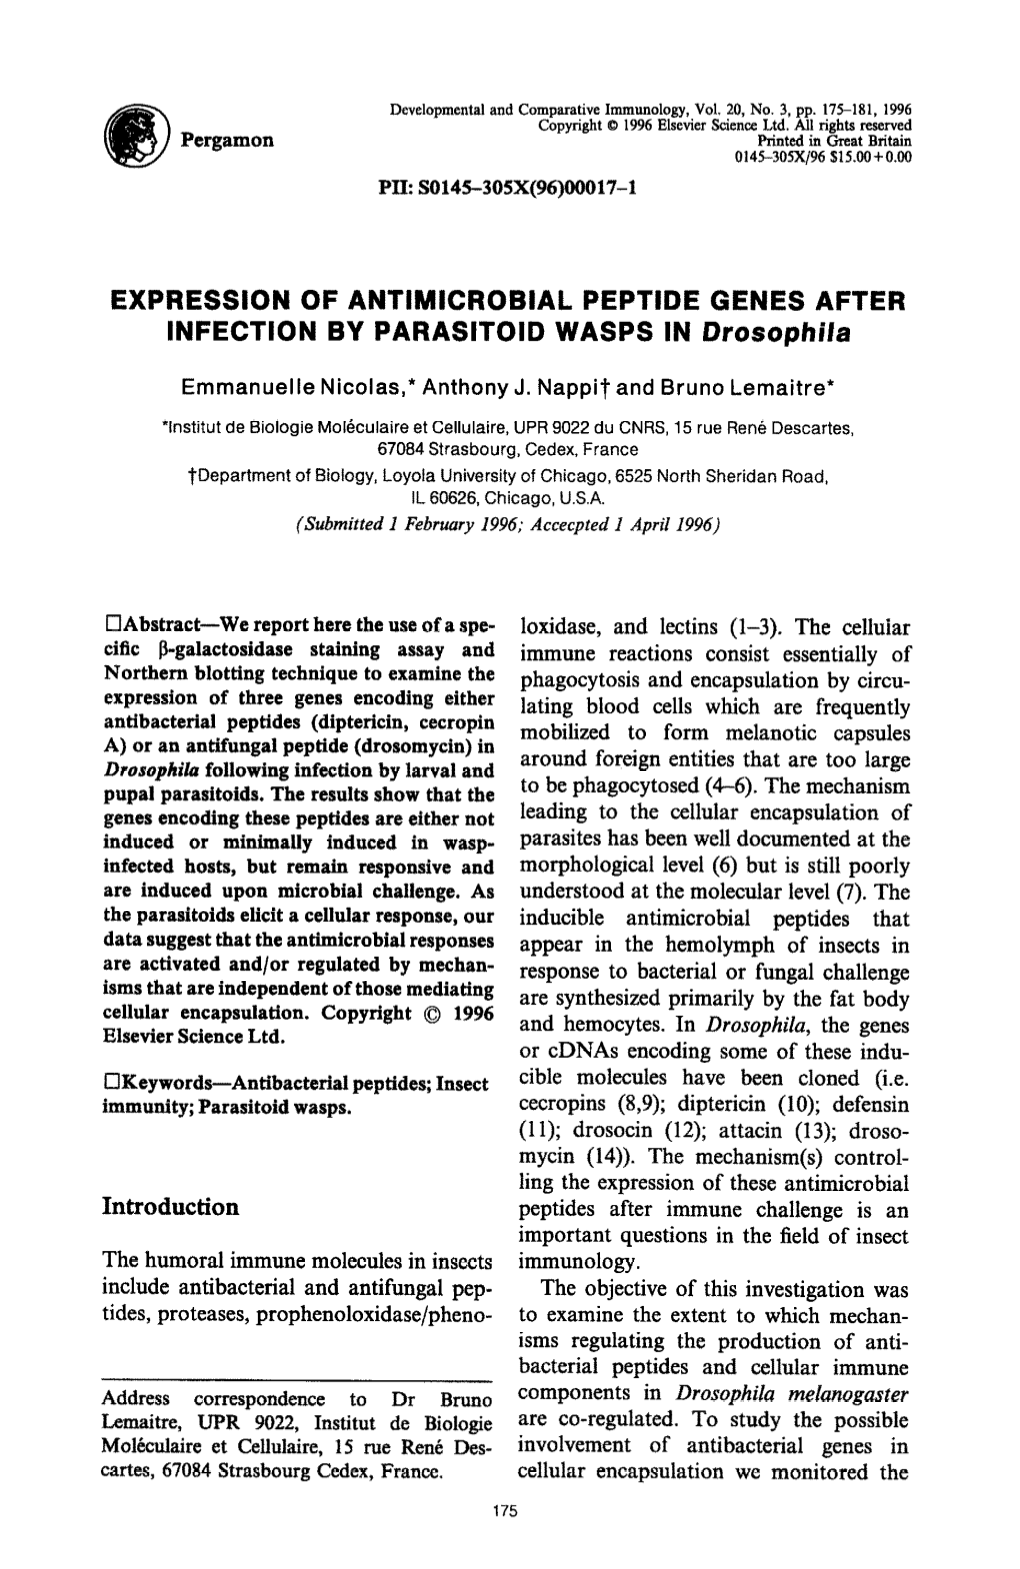 EXPRESSION of ANTIMICROBIAL PEPTIDE GENES AFTER INFECTION by PARASITOID WASPS in Drosophila